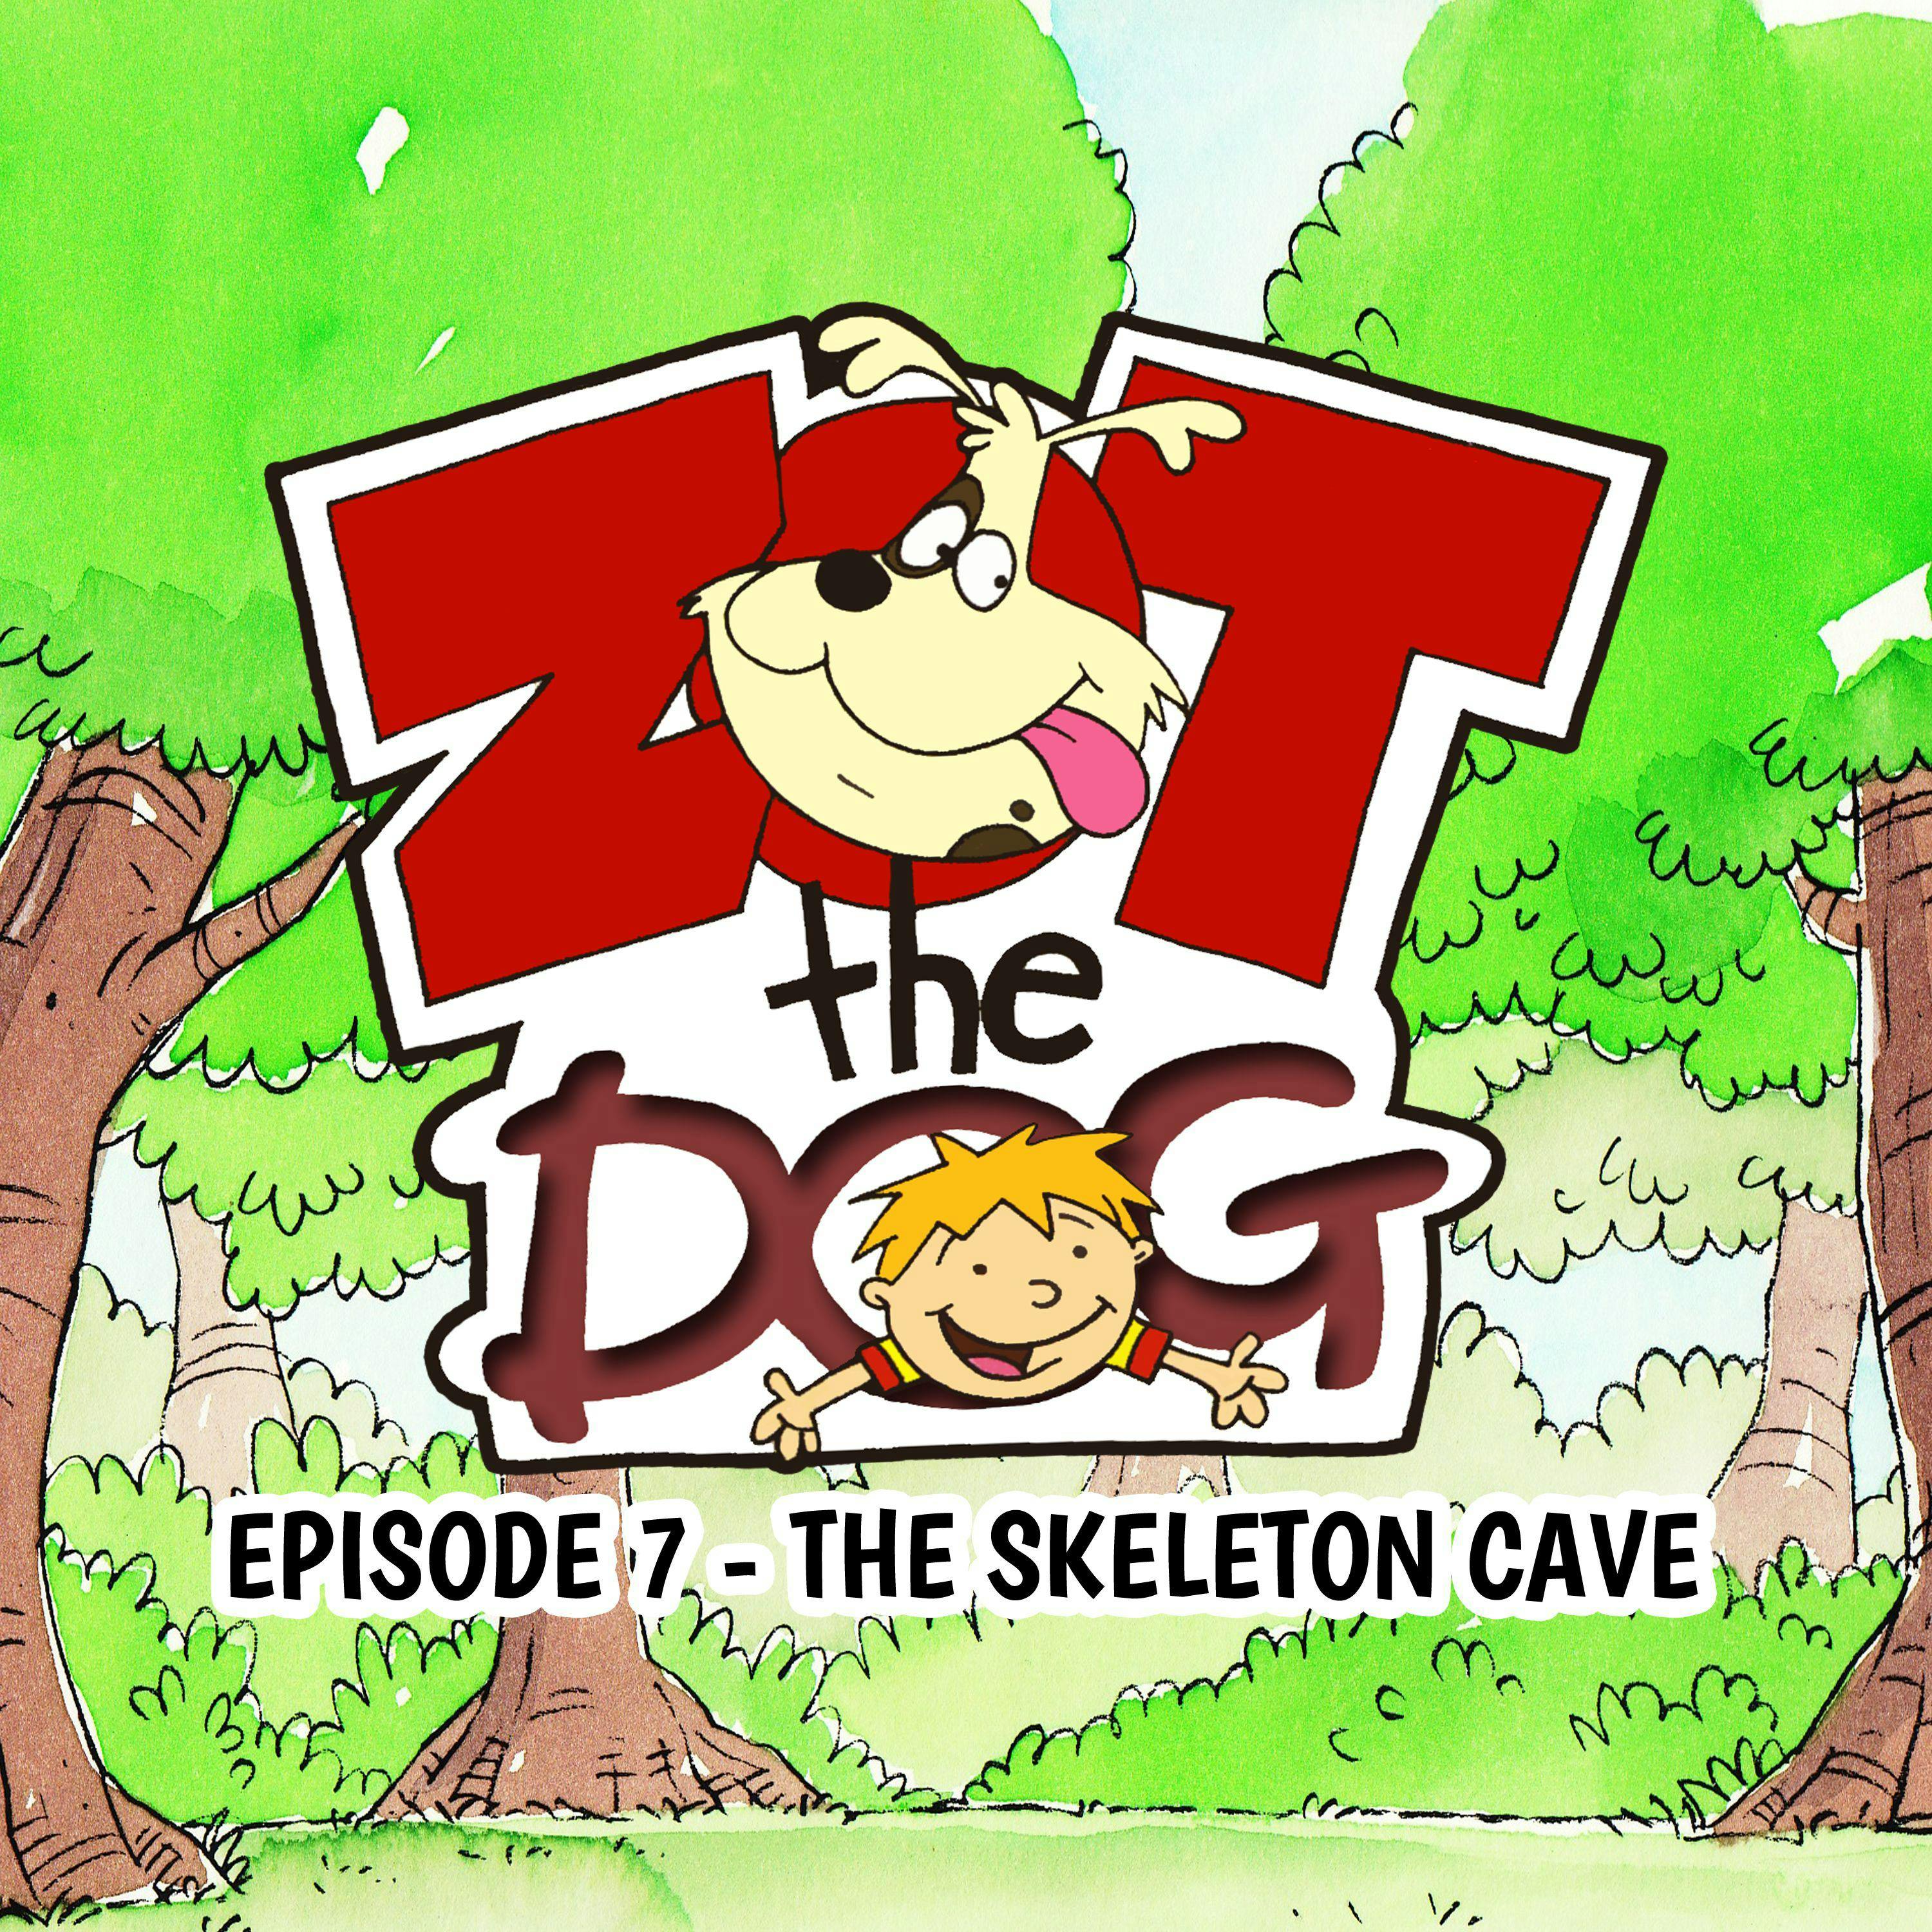 Zot the Dog: Episode 7 - The Skeleton Cave - undefined